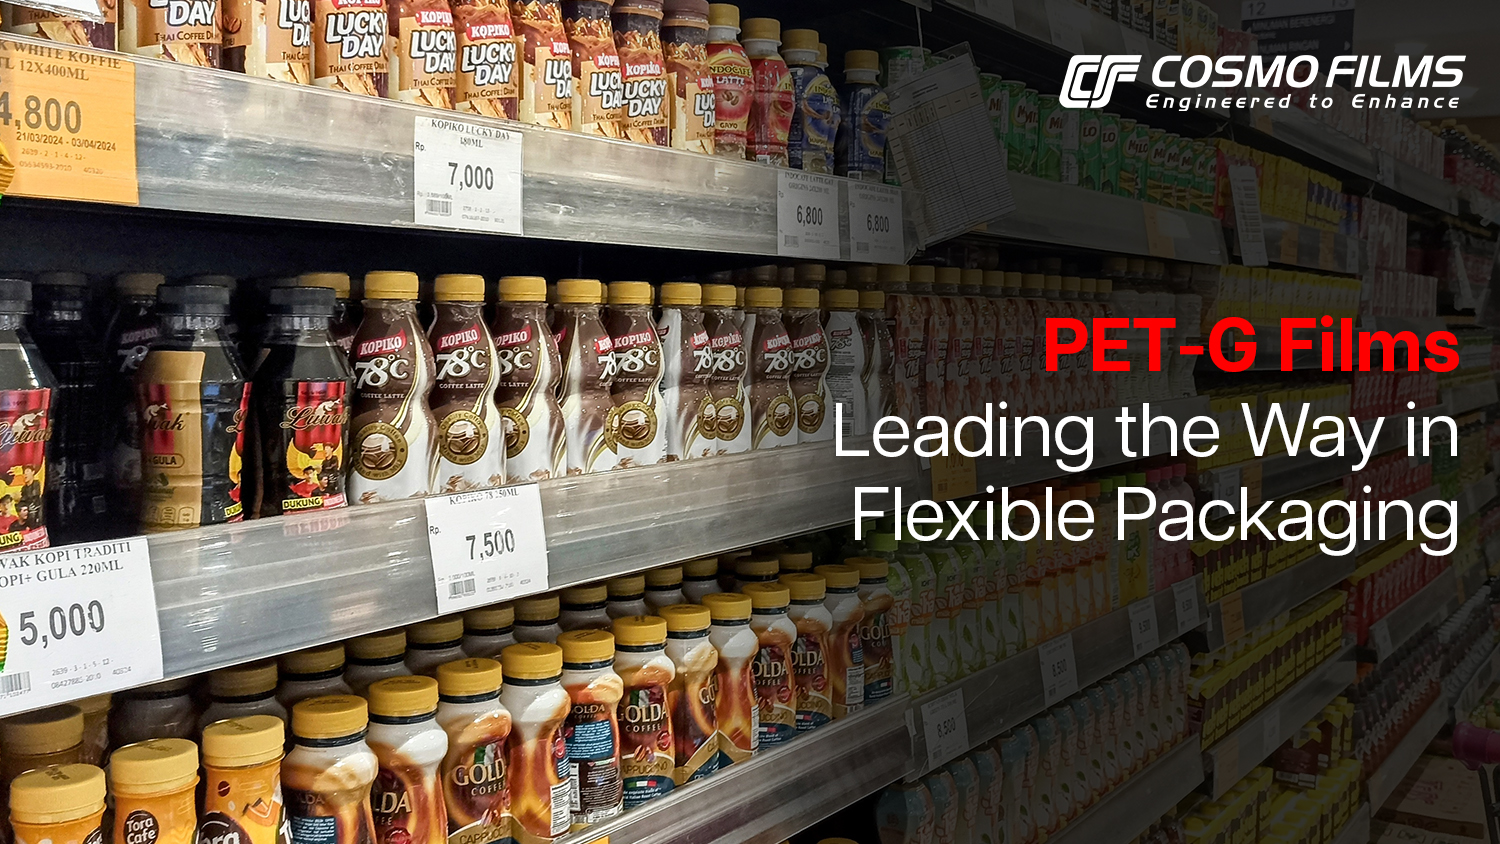 PET-G Films: The Next Generation of Flexible Packaging Solutions